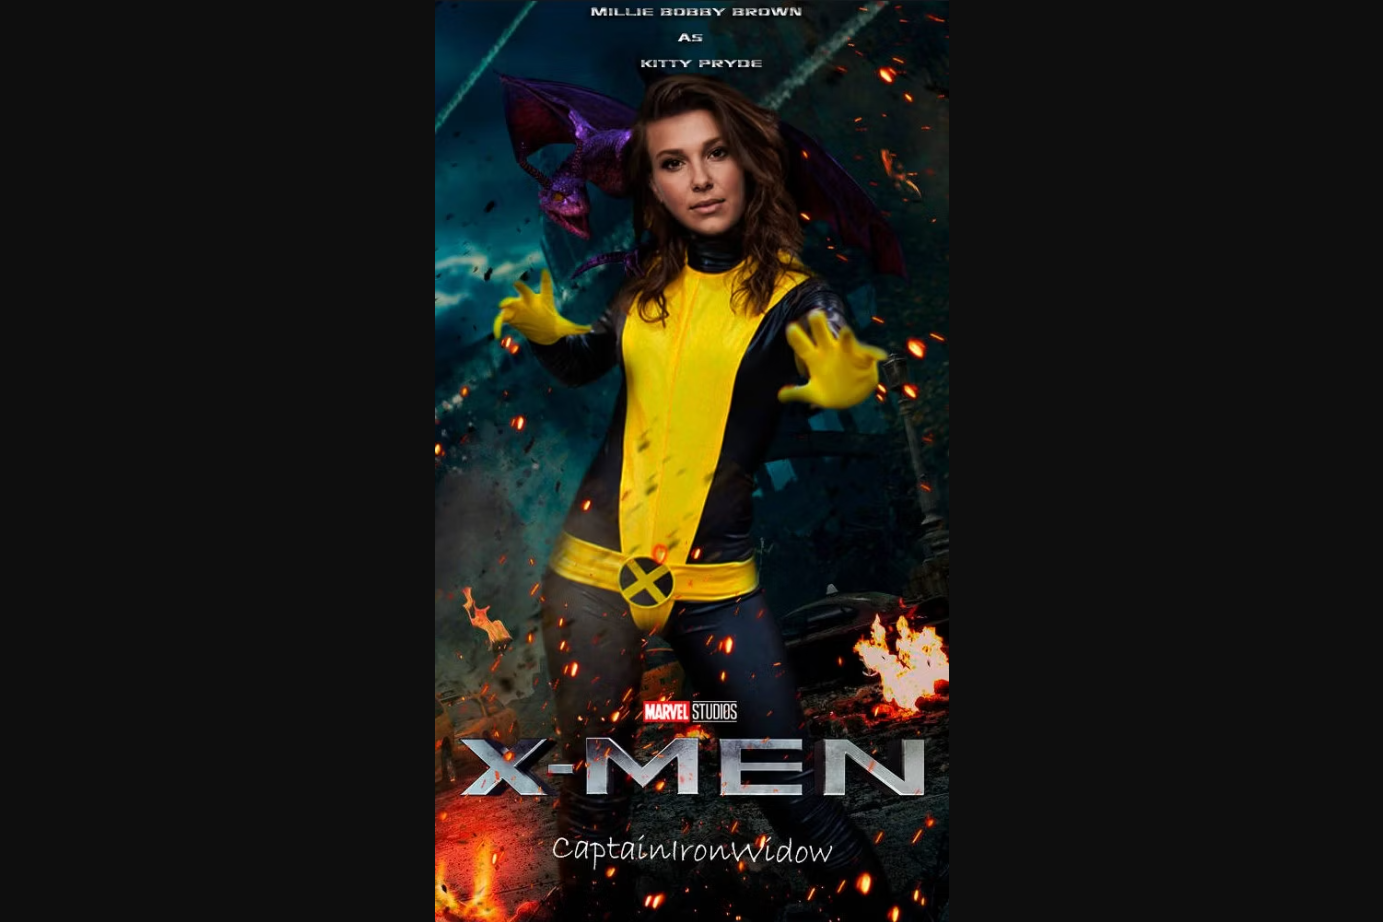 Millie Bobby Brown as Kitty Pryde in the viral fan art